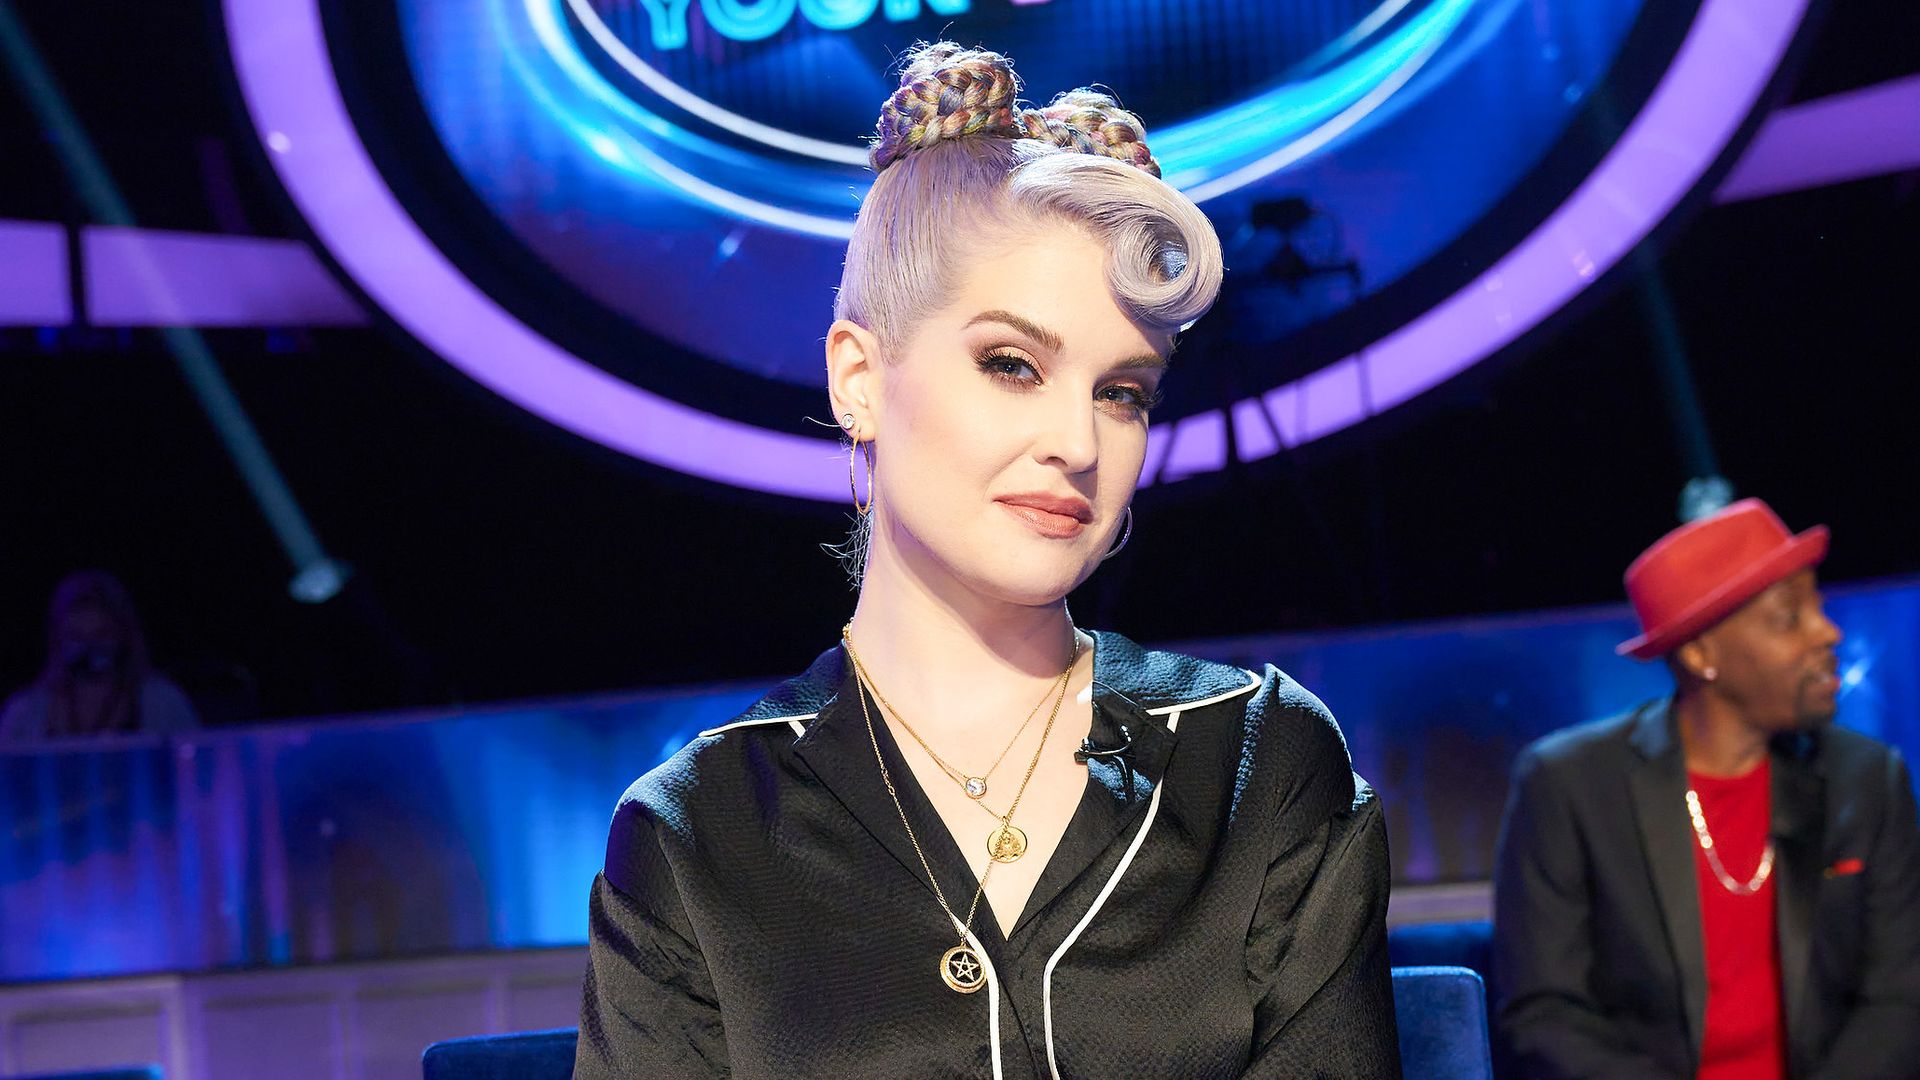 Kelly Osbourne behind the scenes in the  series premiere episode of I CAN SEE YOUR VOICE airing Wednesday, Sept. 23 (9:00-10:00 PM ET/PT) on FOX. (Photo by FOX via Getty Images)